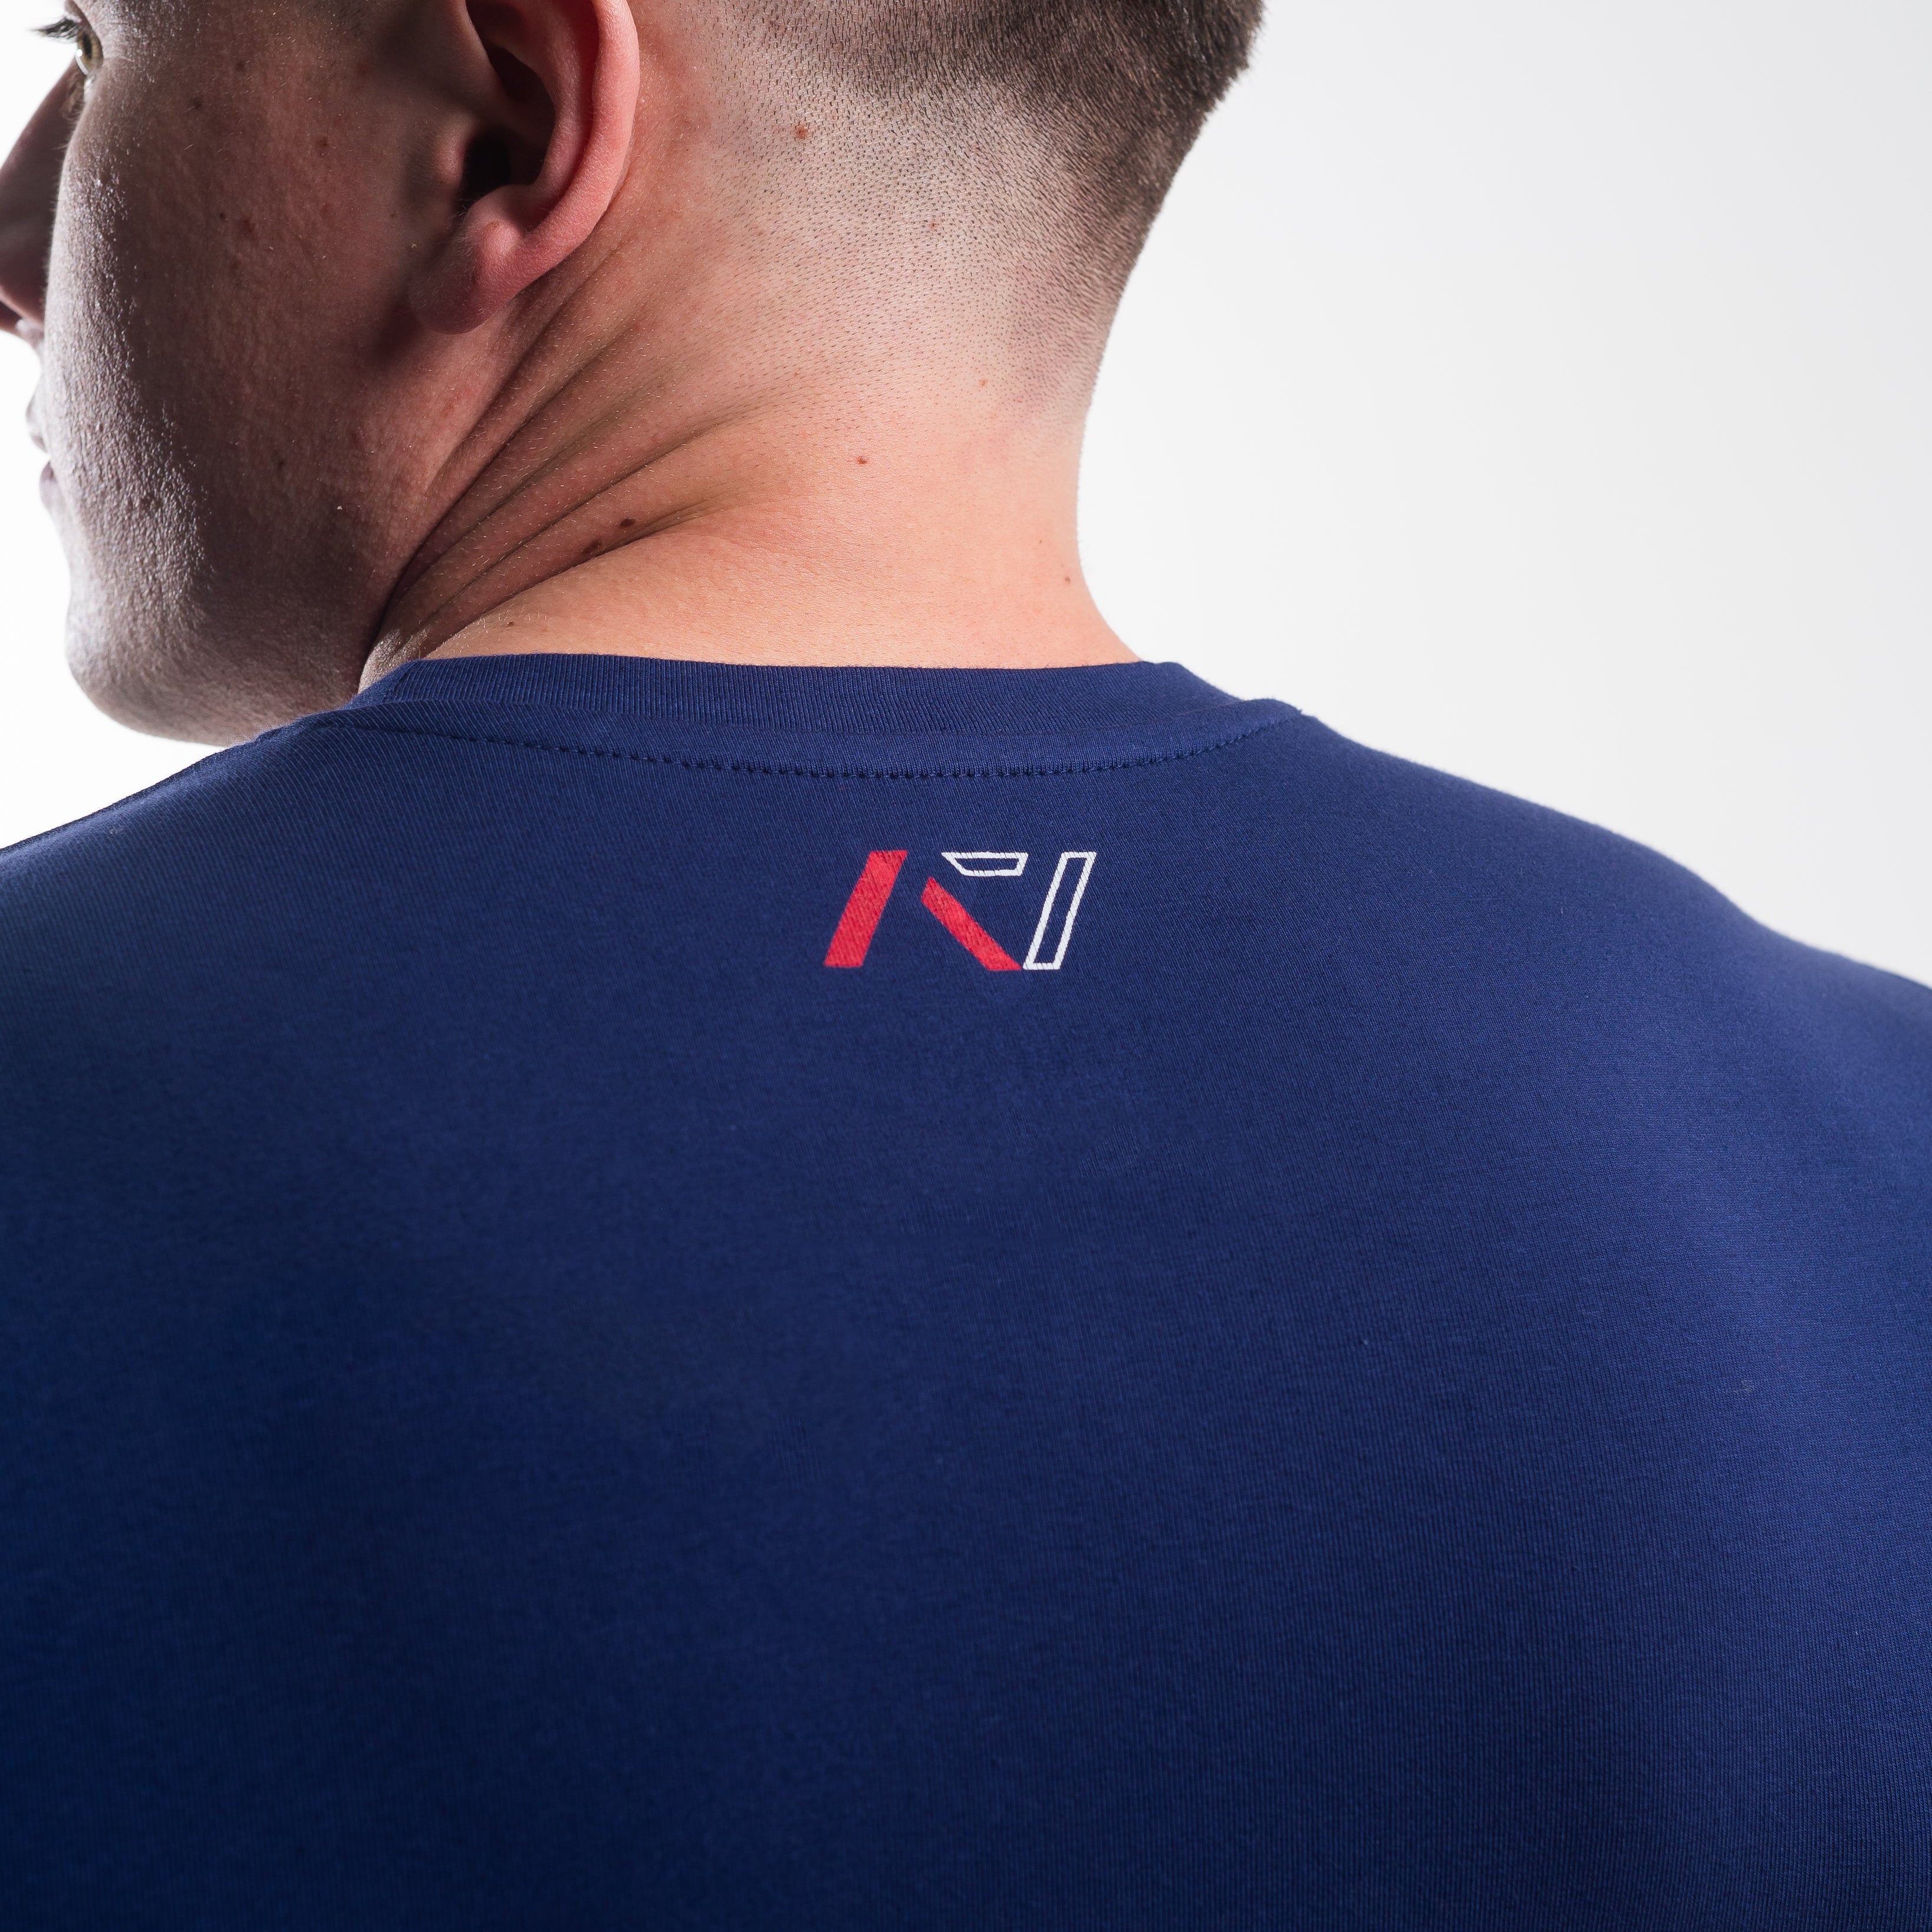 Night Light RWB Wave Non Bar Grip Shirt features one of our favorite designs that showcases your patriotic spirit with our Red White and Blue colour palette! All A7 Powerlifting Equipment shipping to UK, Norway, Switzerland and Iceland.